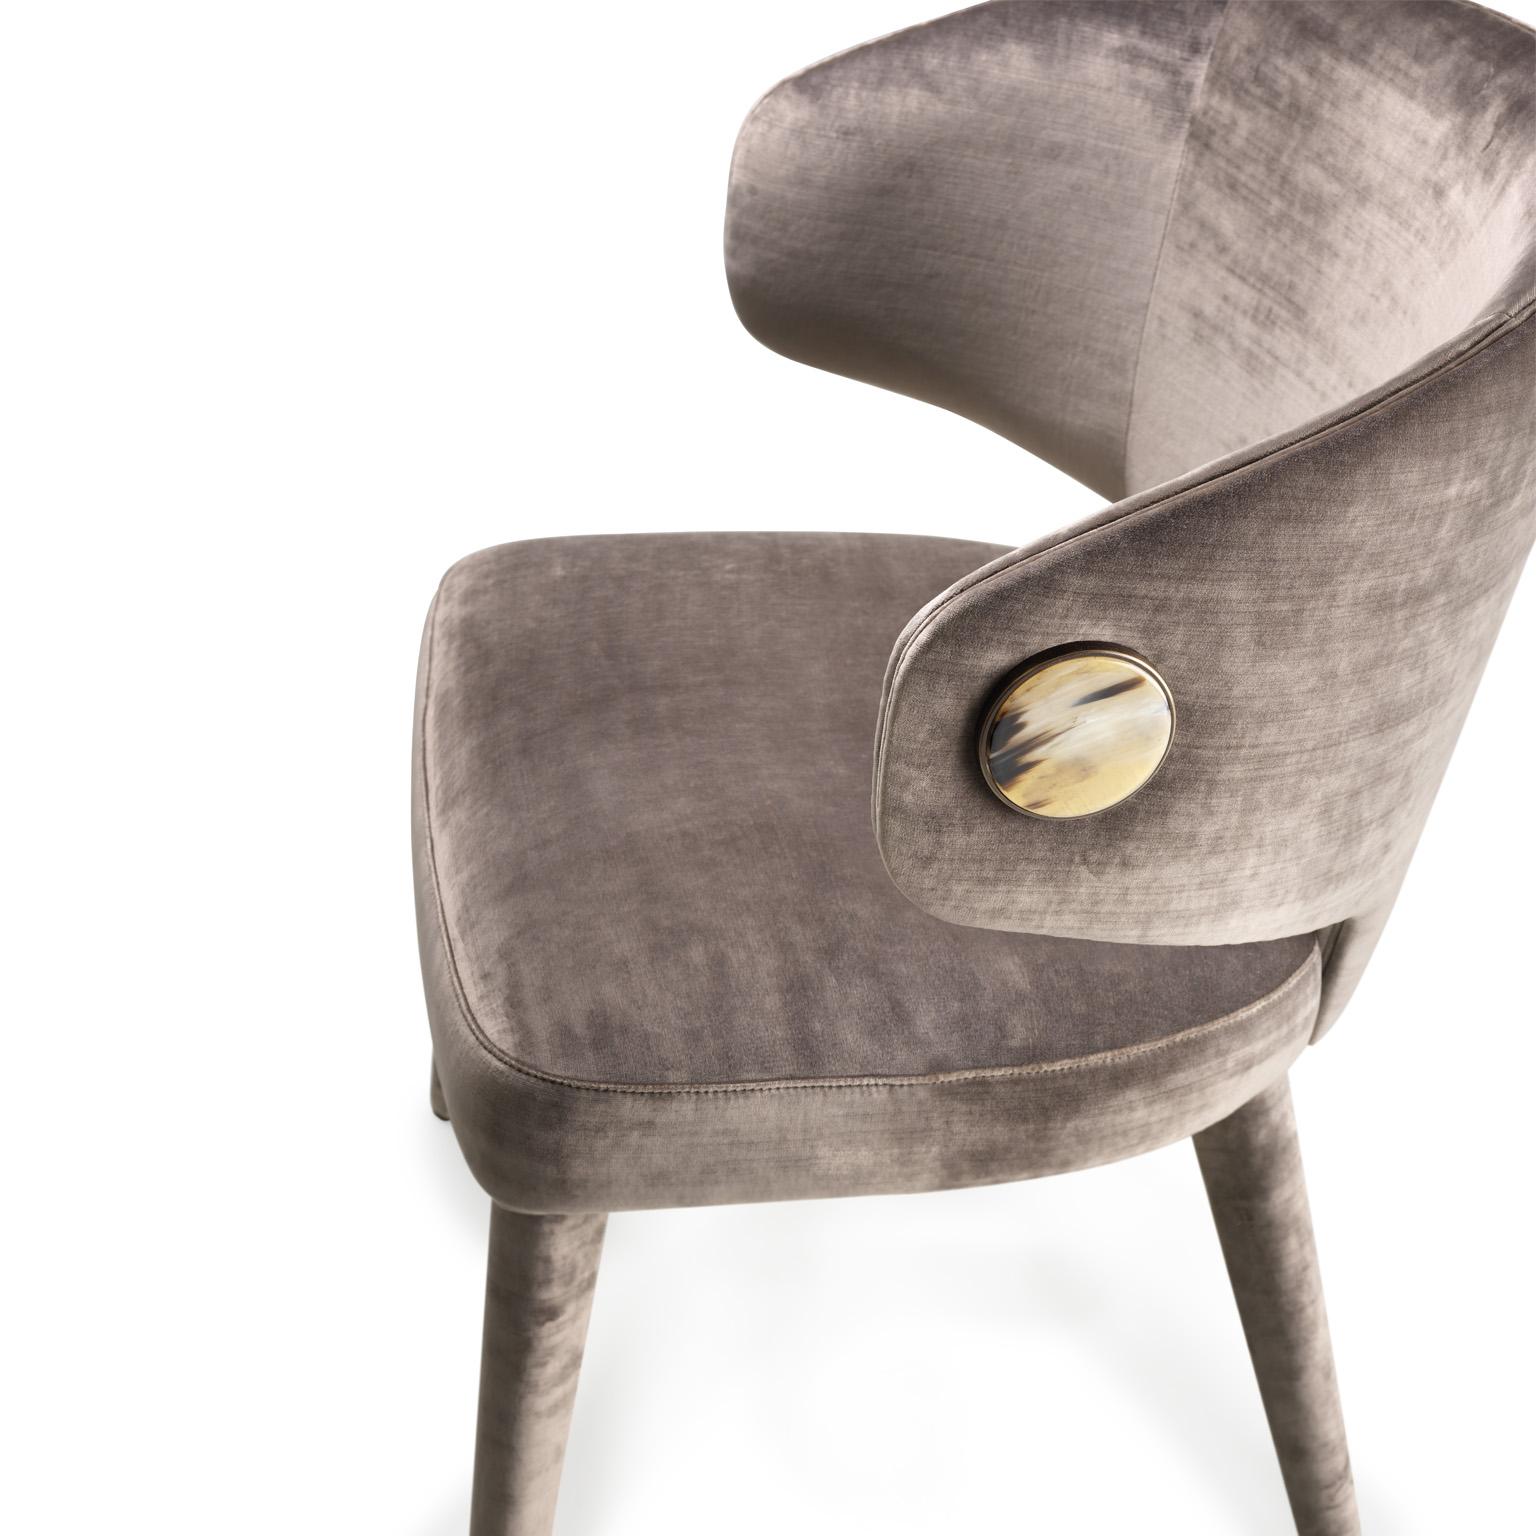 Hand-Crafted Circe Chair in Diso Velvet with Detail in Corno Italiano, Mod. 4433CB For Sale